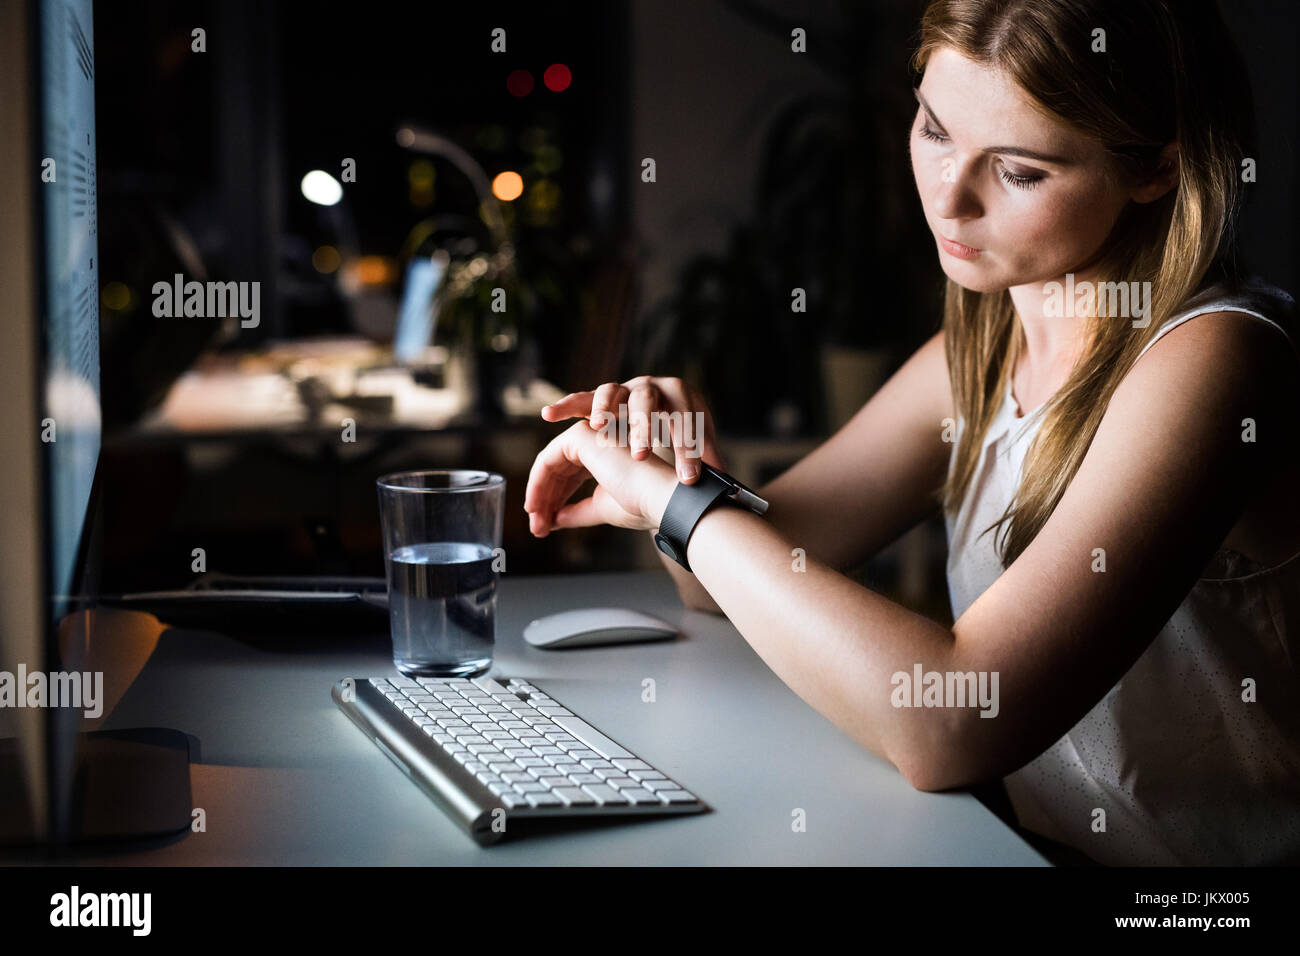 Businesswoman in her office at night looking at watch. Stock Photo